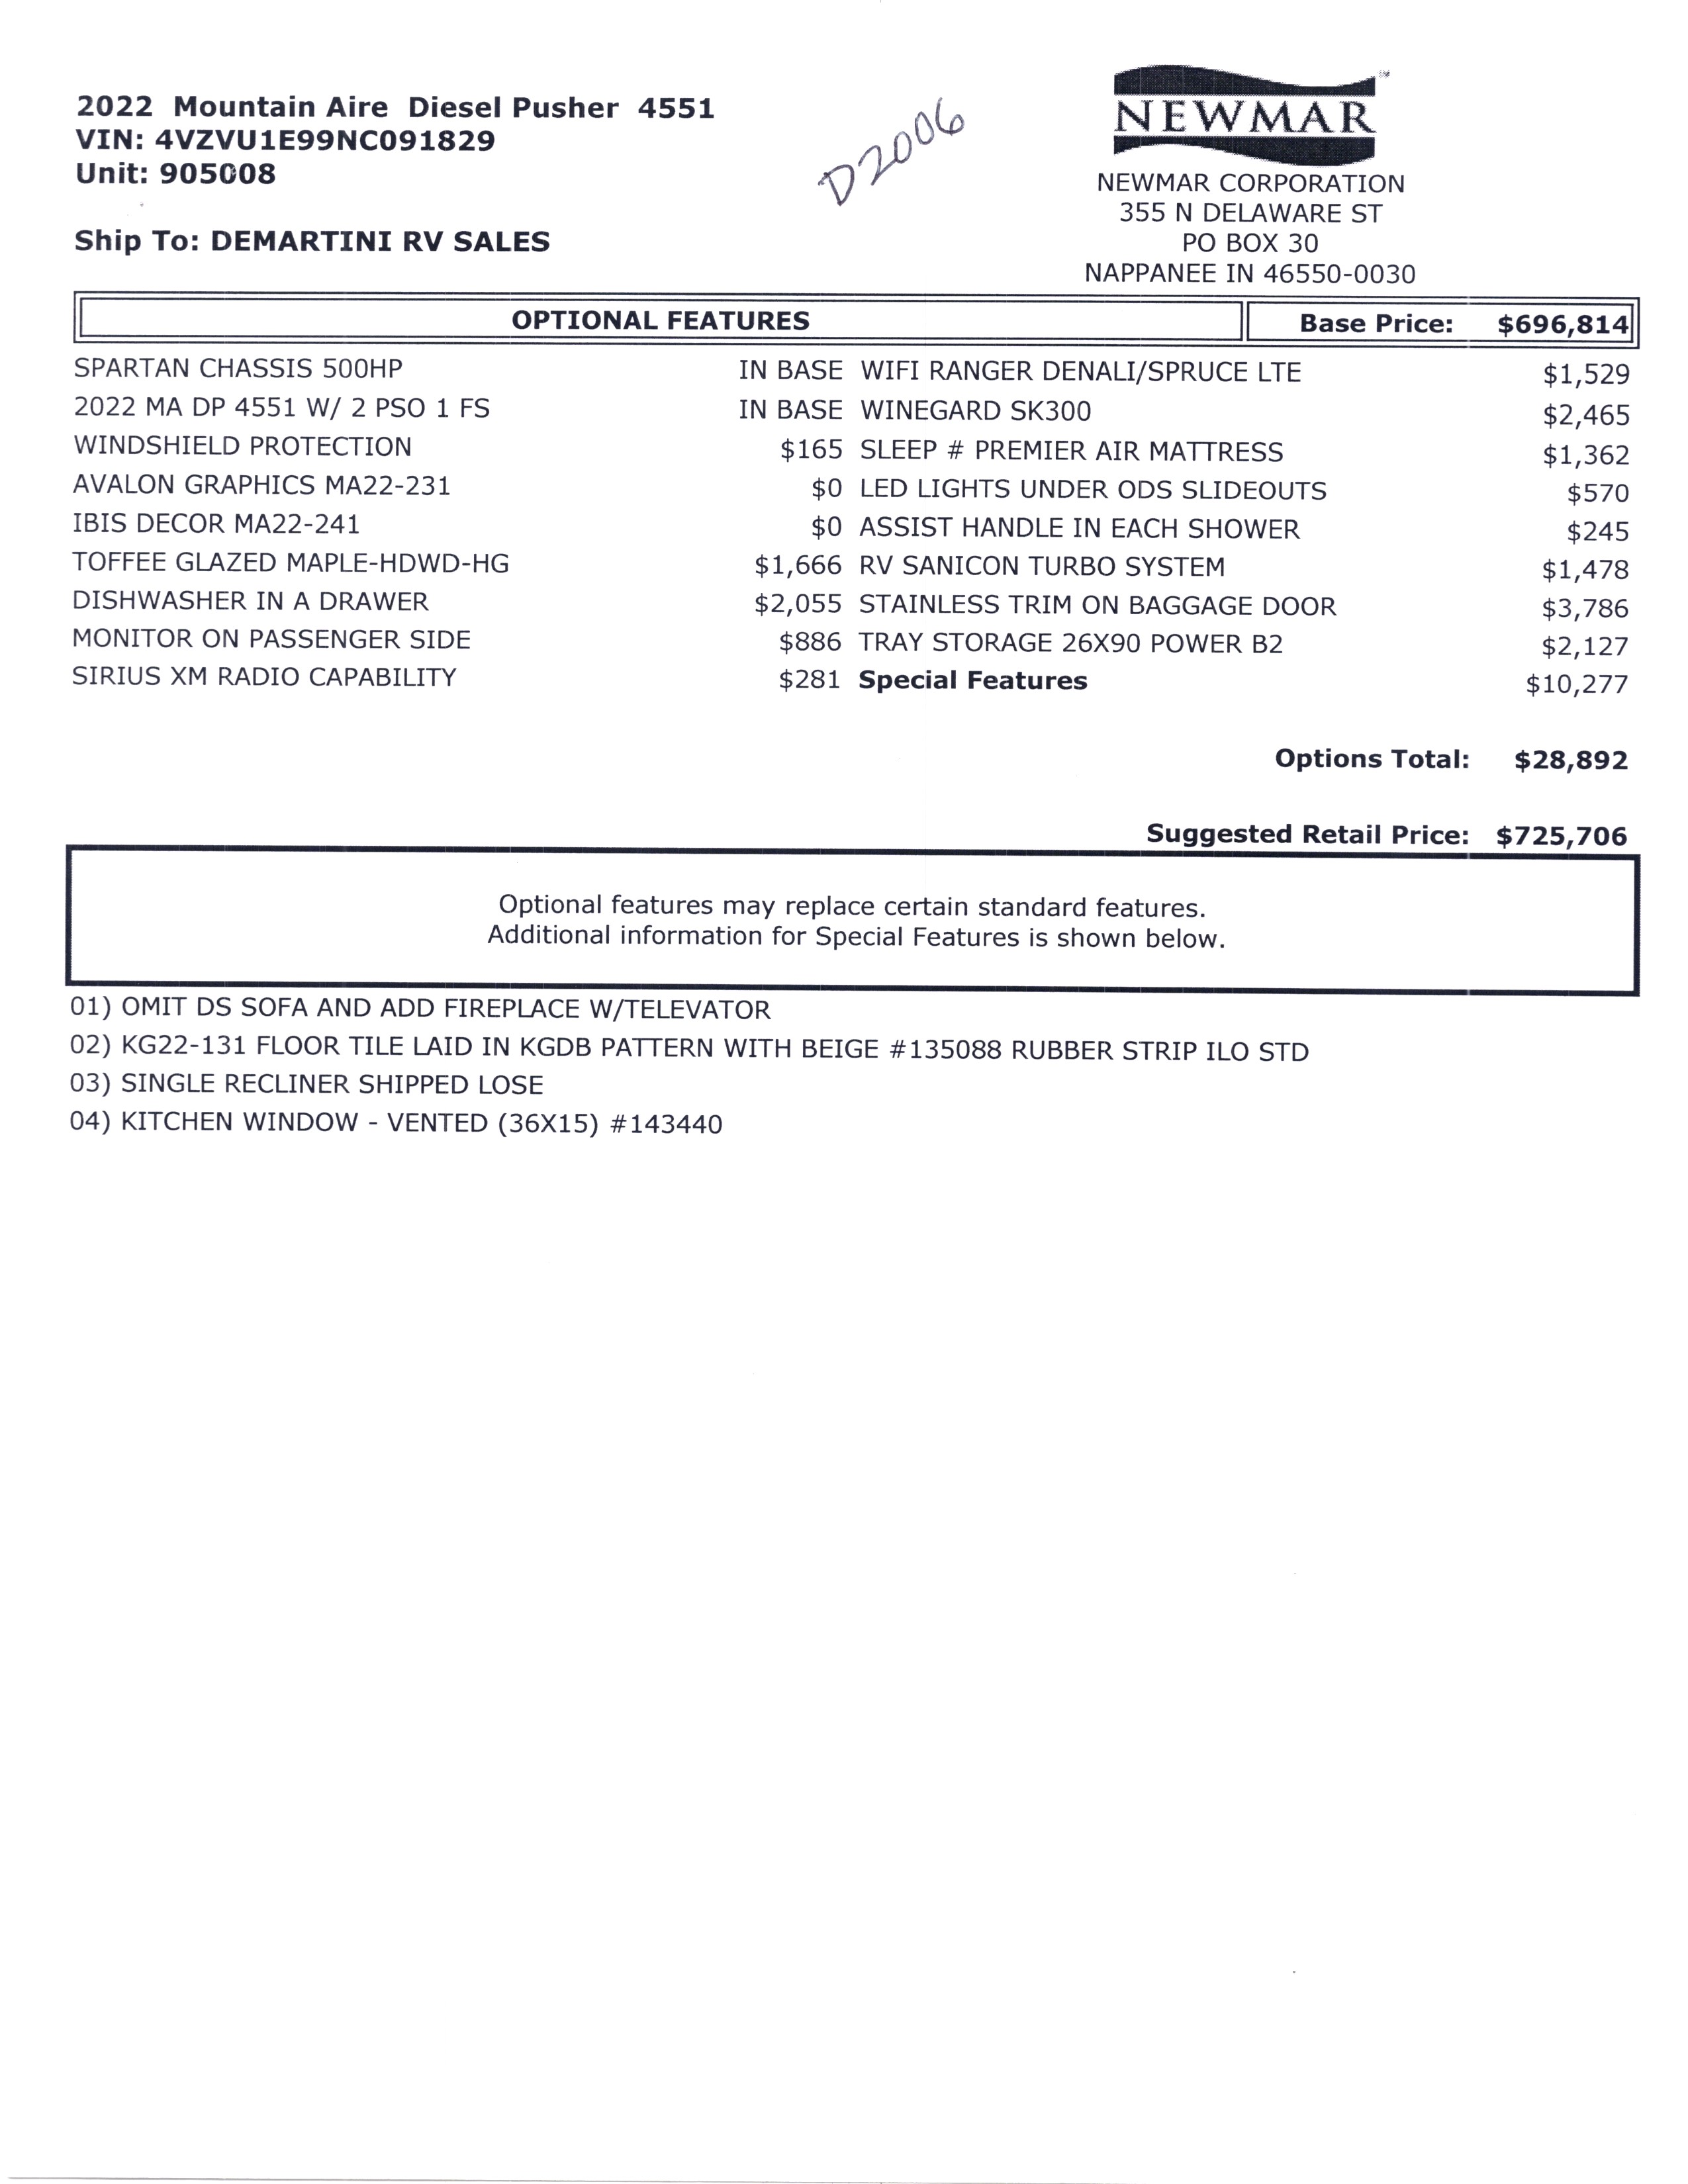 2022 Newmar Mountain Aire 4551 MSRP Sheet